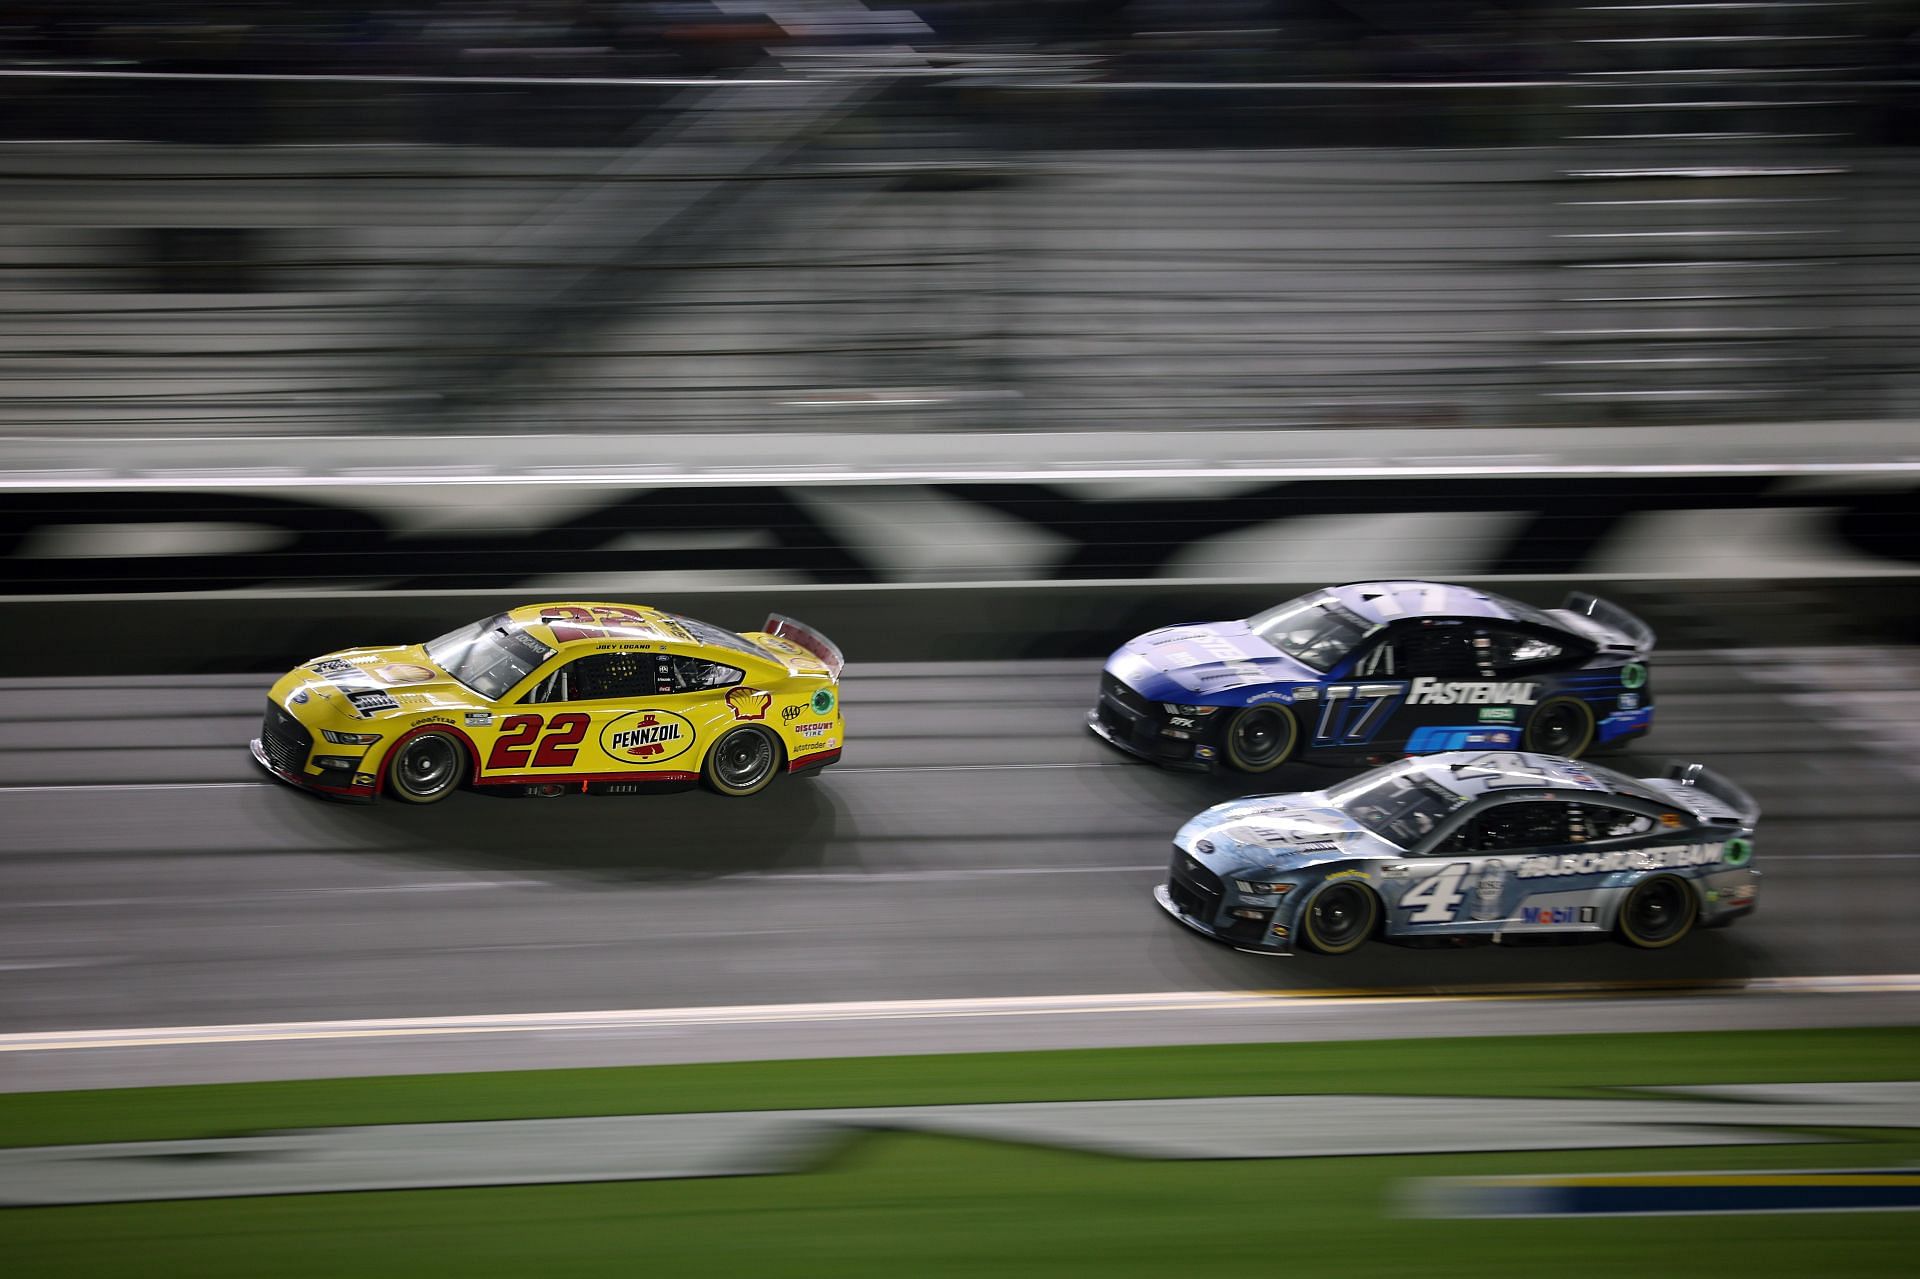 Joey Logano (#22) leads Chris Buescher (#17) and Kevin Harvick (#4) during the NASCAR Cup Series Bluegreen Vacations Duel #2 at Daytona (Photo by James Gilbert/Getty Images)